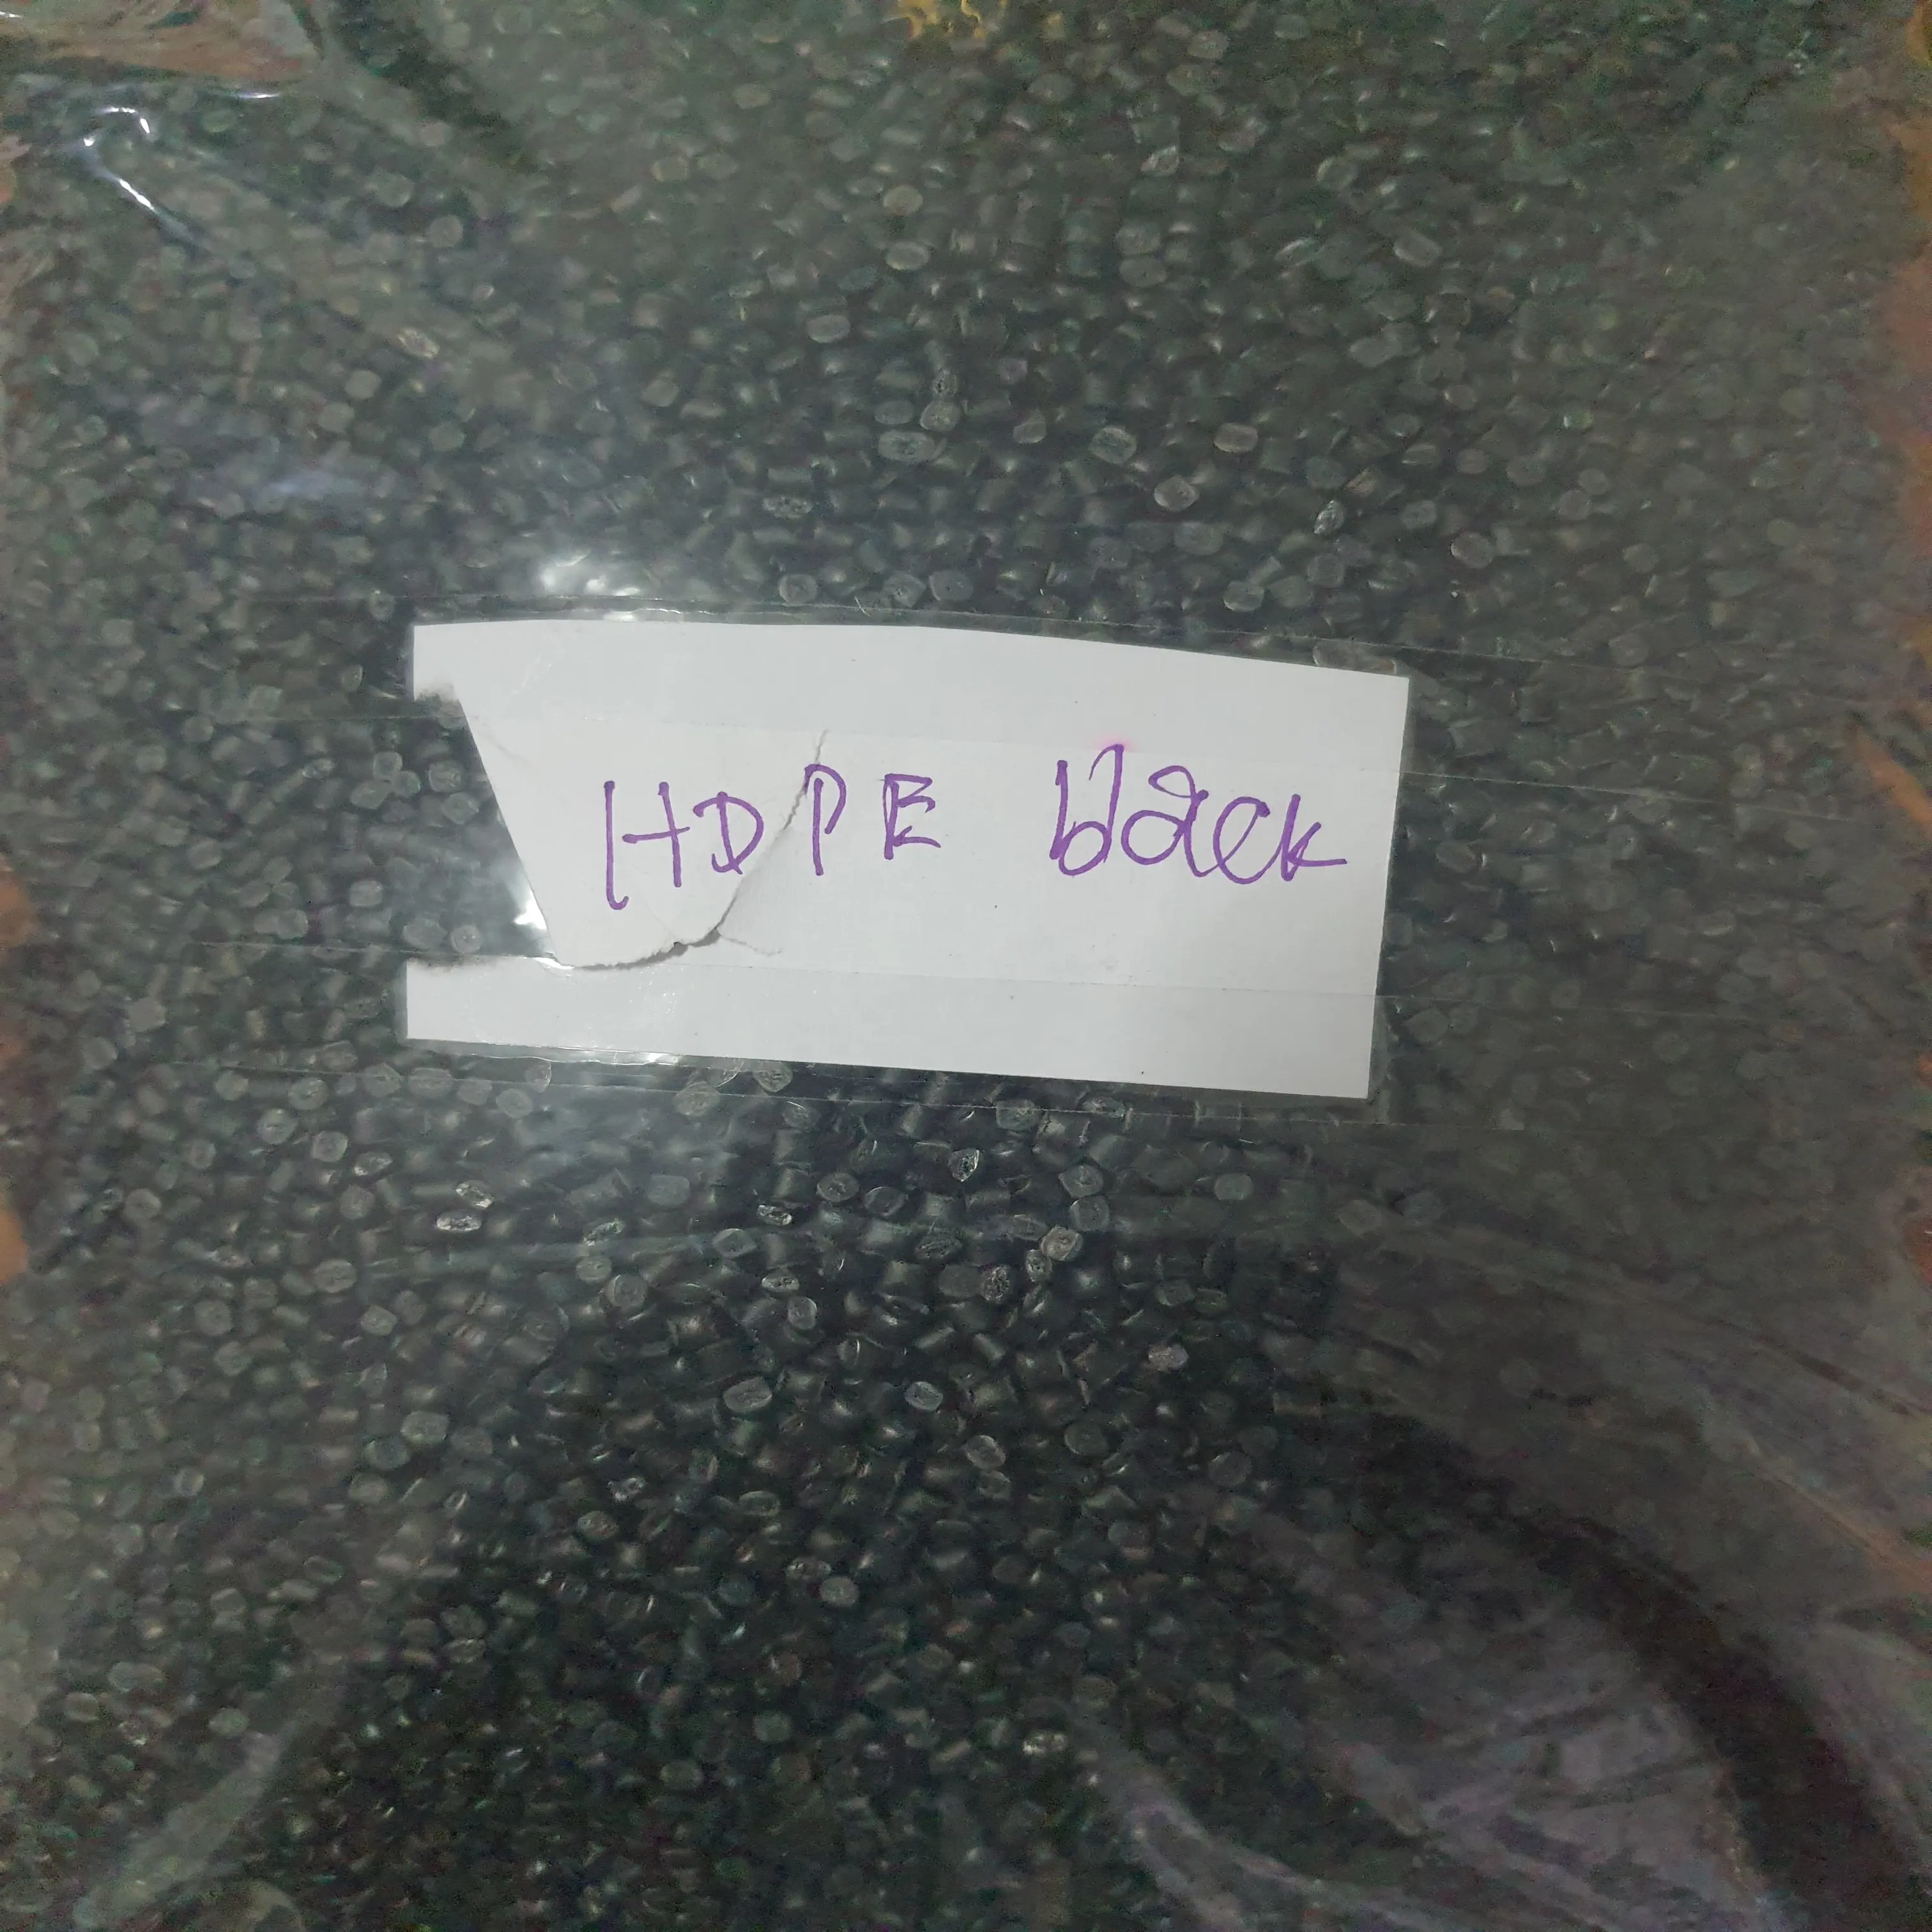 HDPE BLACK, RECYCLED